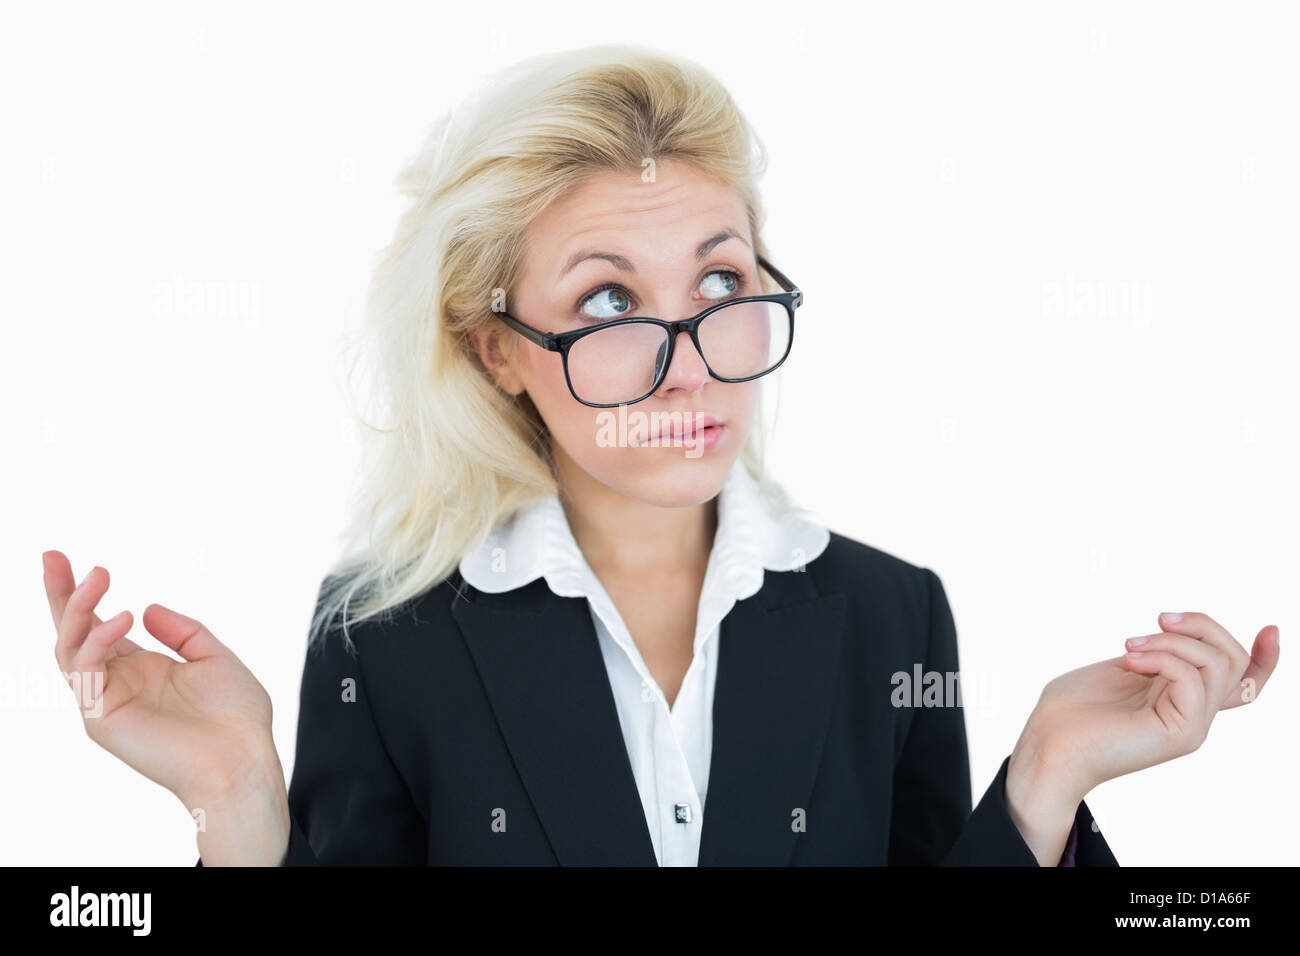 Young business woman gesturing do not know sign Stock Photo